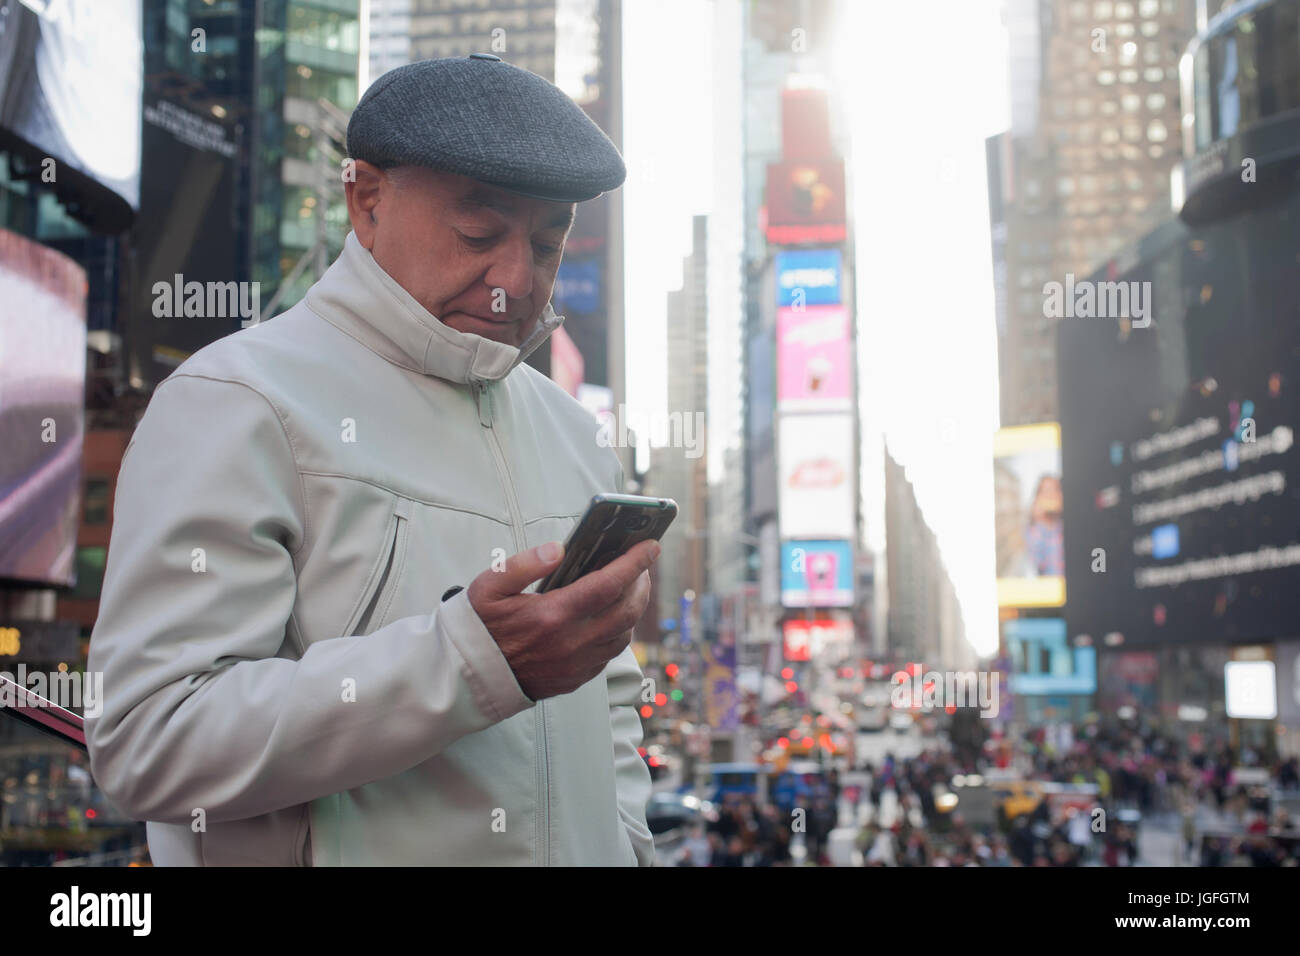 Hispanic man texting on cell phone in crowded city Stock Photo